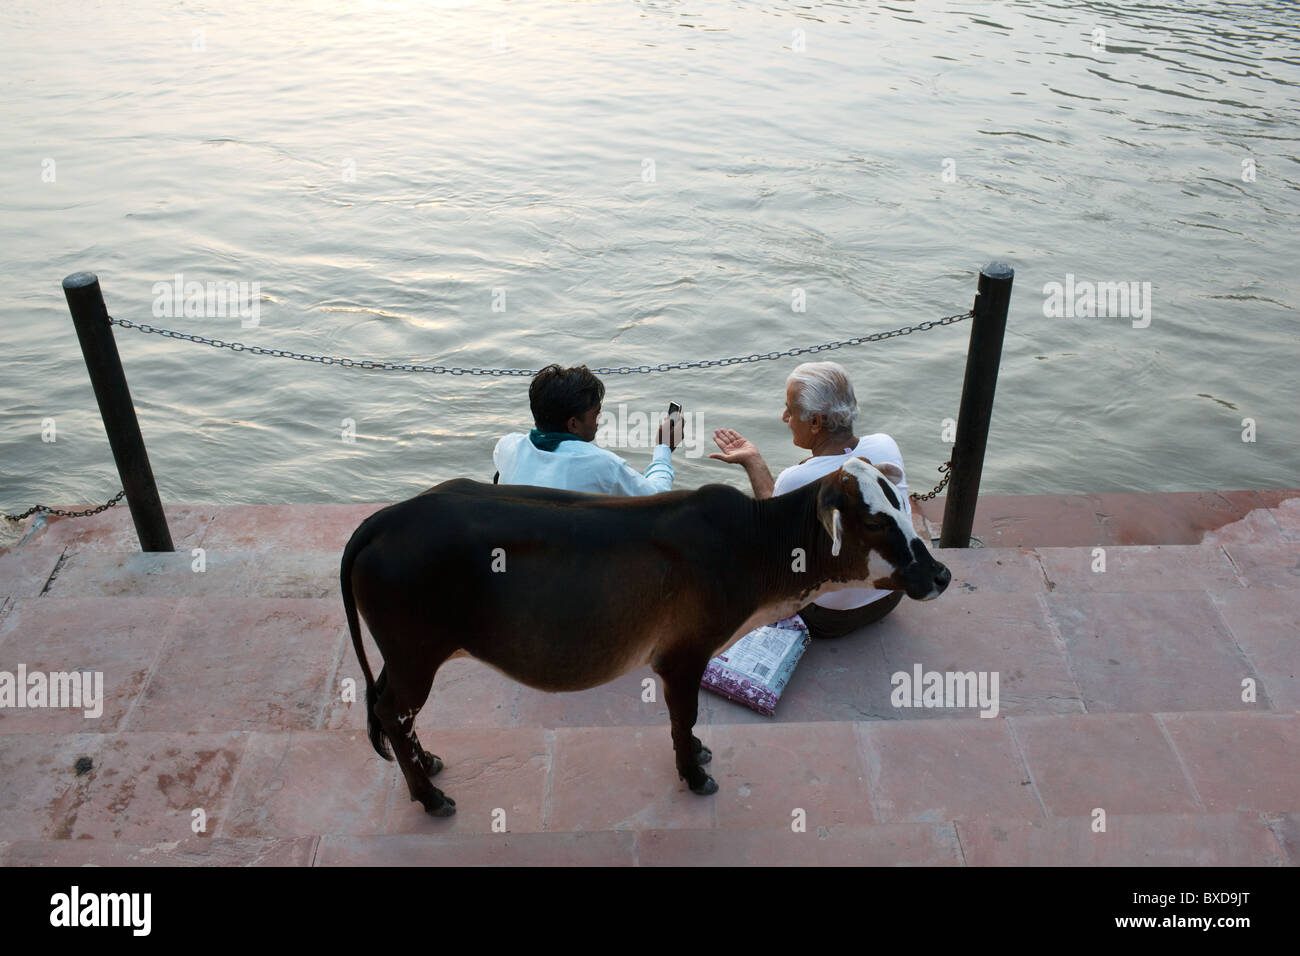 A cow and two men sitting in a ghat of Ganges river in Rishikesh, Uttarakhand, India. Stock Photo